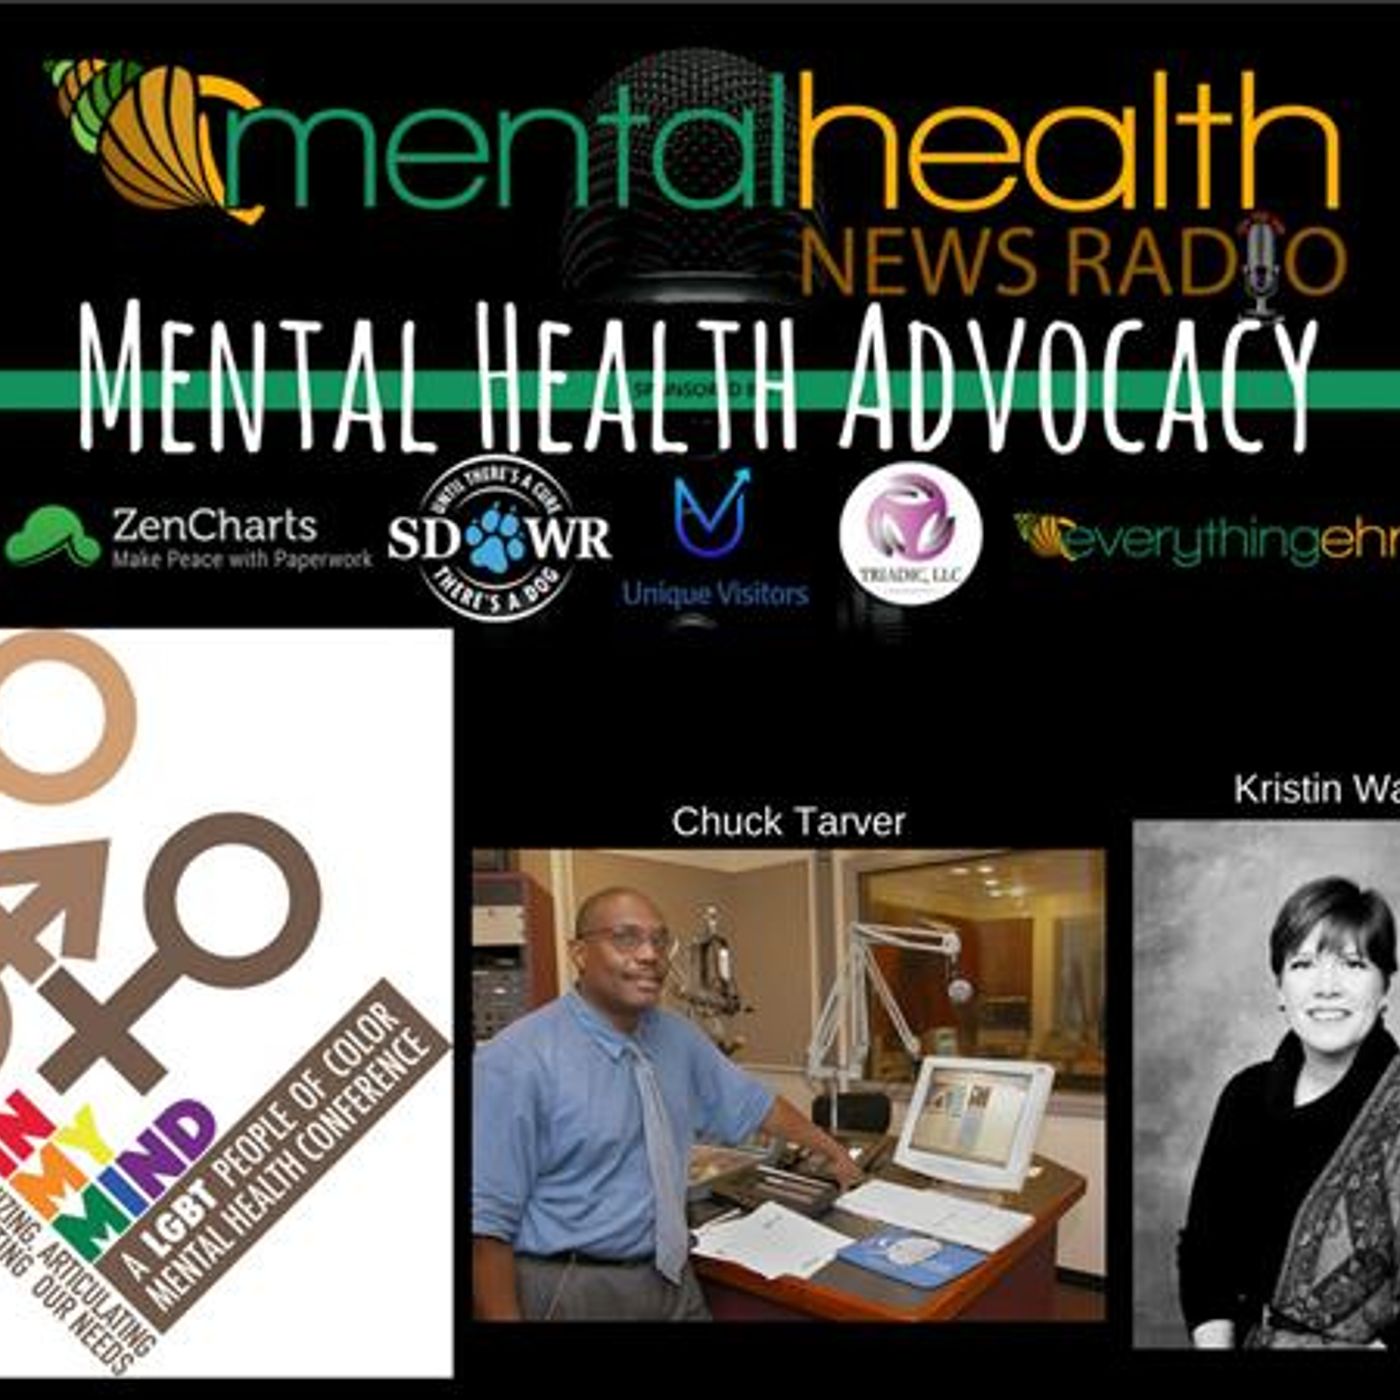 Mental Health News Radio - DBGM In My Mind Conference: Mental Health Advocacy with Chuck Tarver